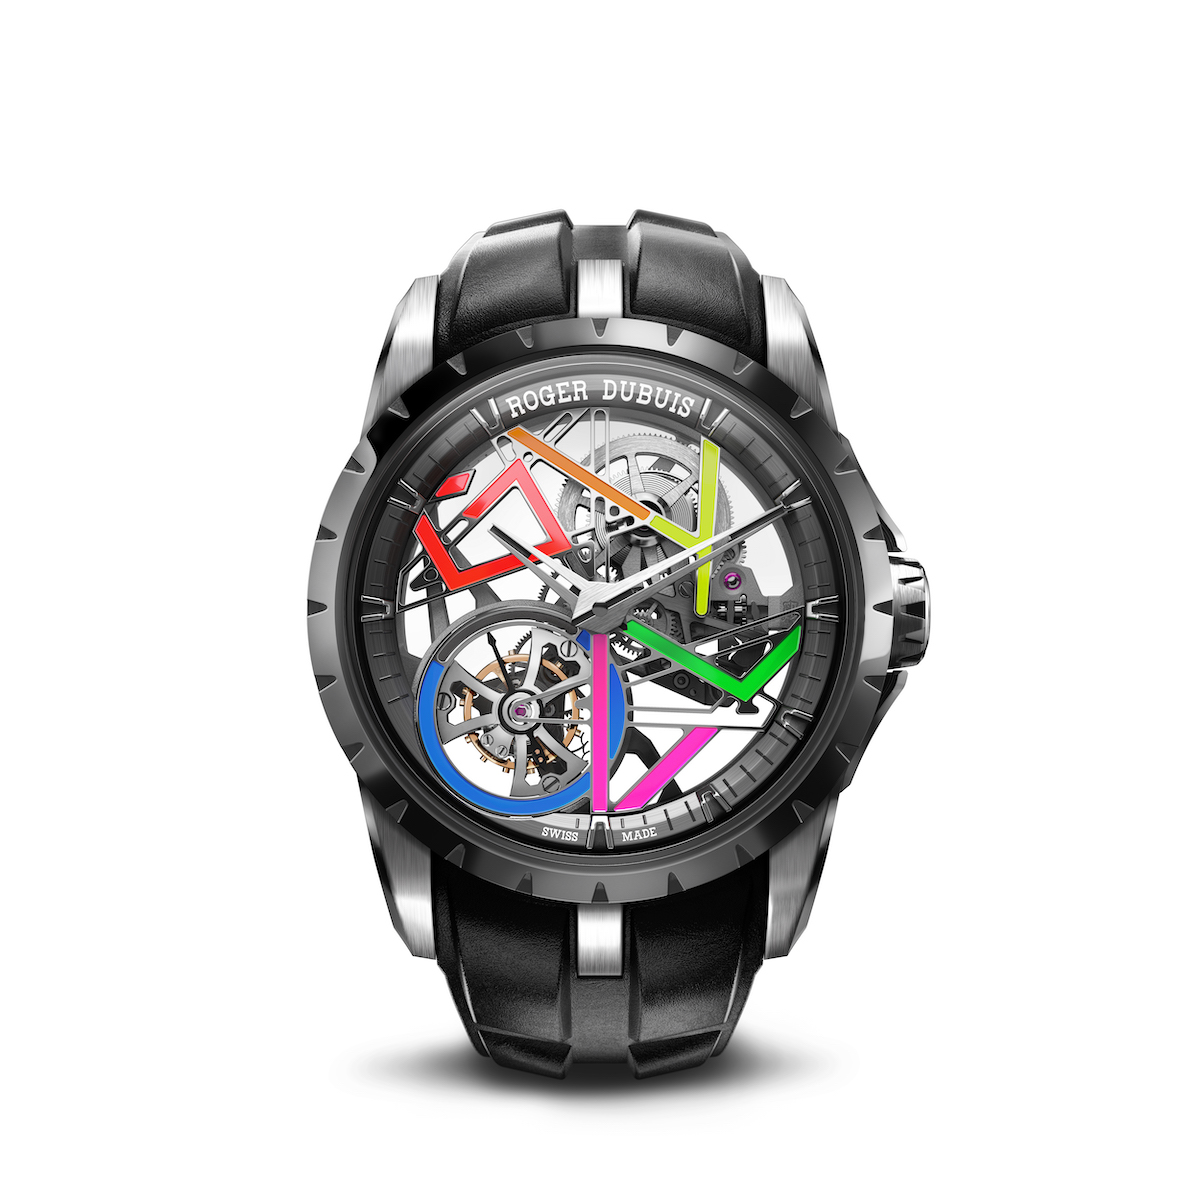 Roger Dubuis Excalibur Gully Monotourbillon Limited Edition Skeleton Watch